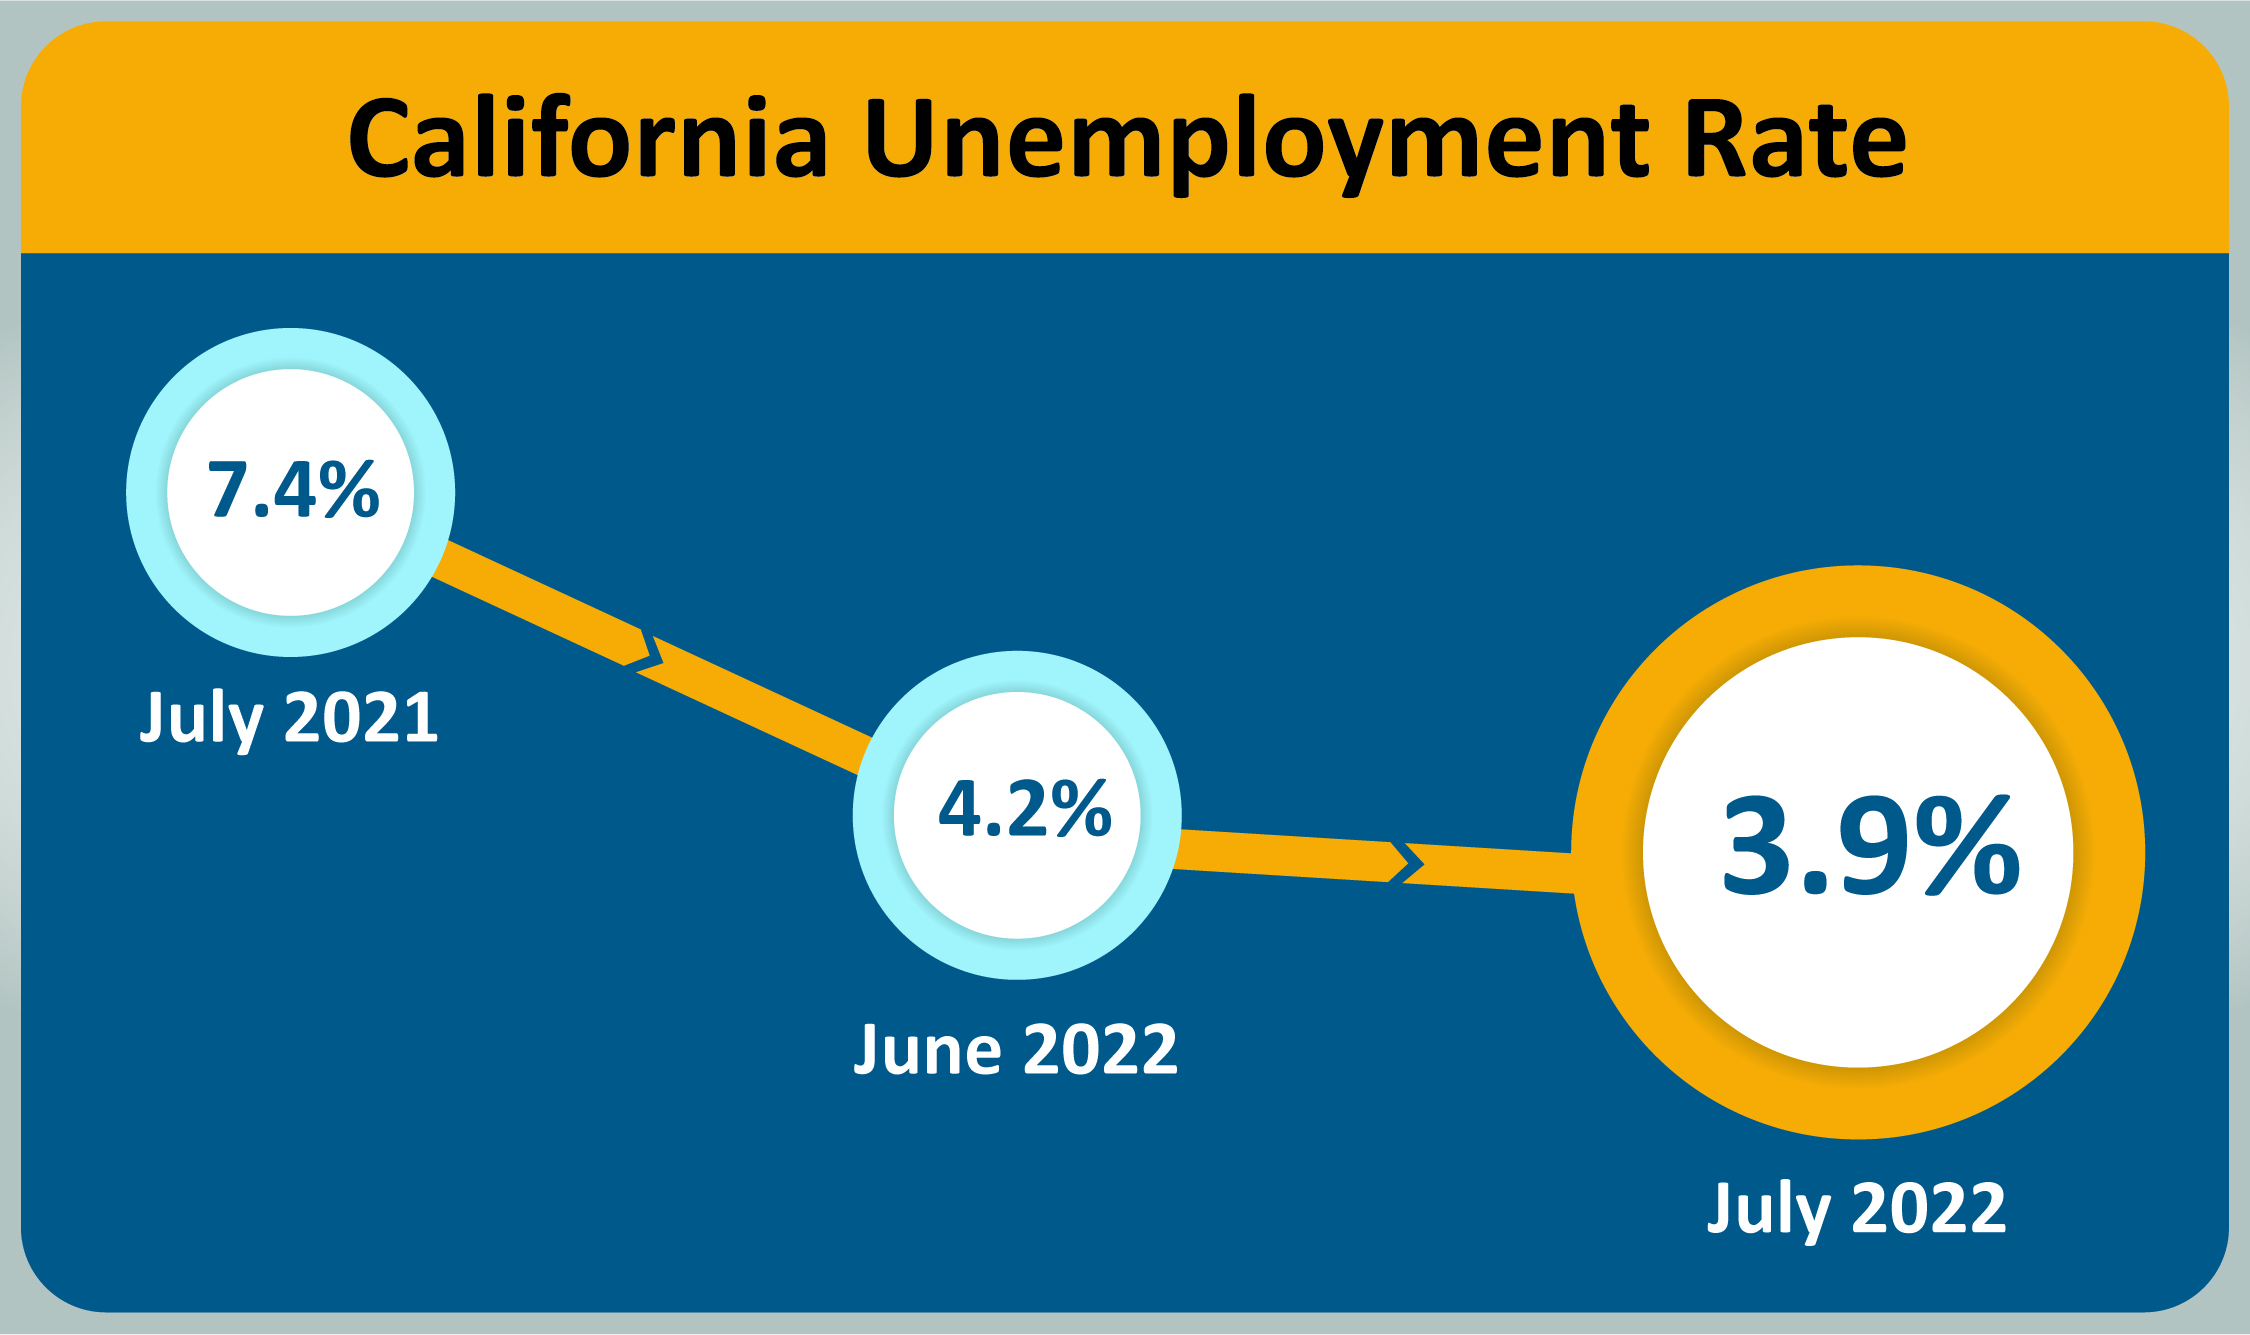 The California unemployment rate was 3.9 percent in July 2022, below June 2022’s rate of 4.2 percent.